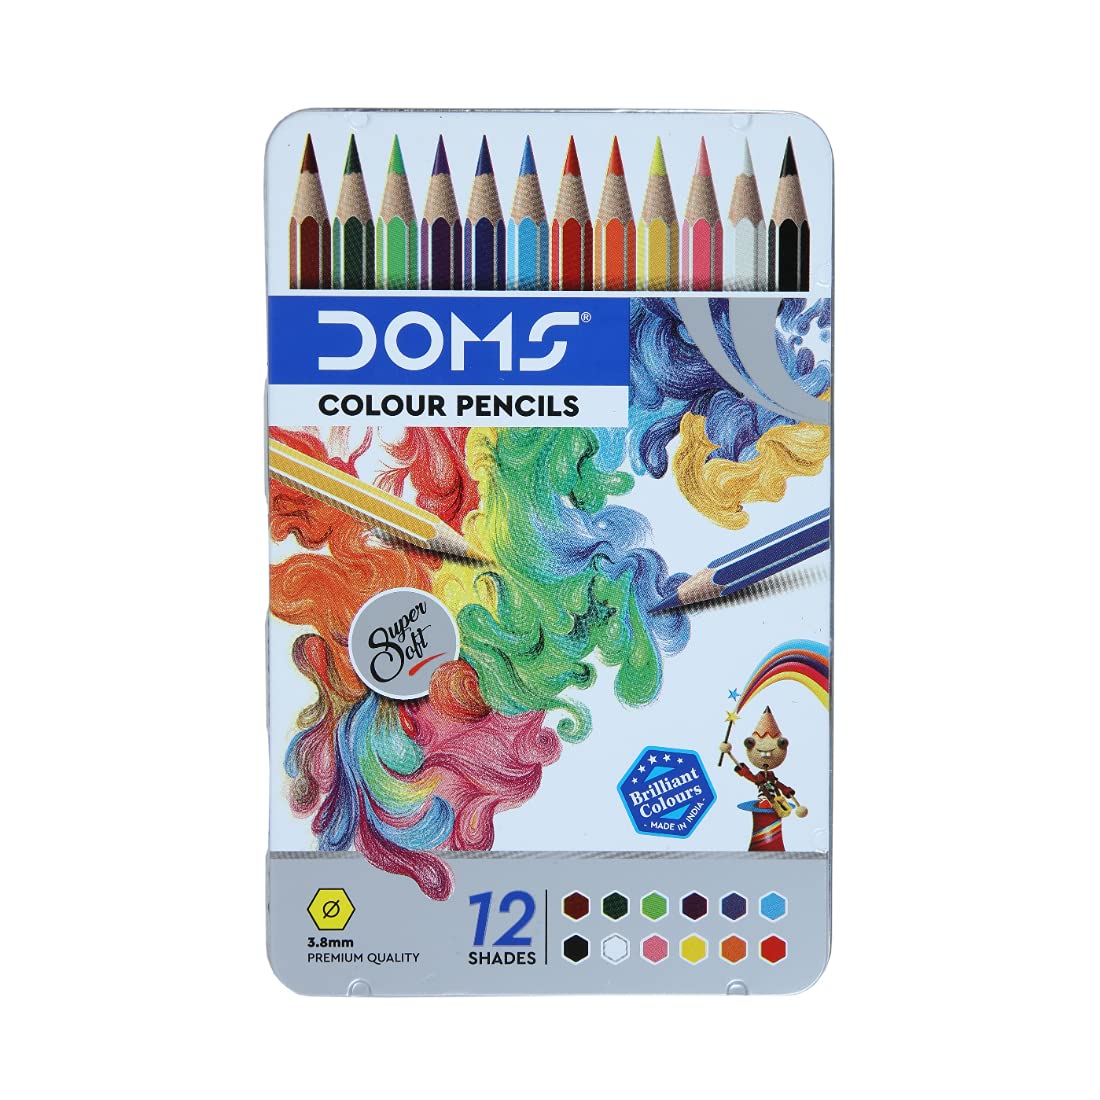 Doms 12 Shades Super Soft Color Pencils Flat Tin Box | Smooth Color Application | For Blending & Experimenting Different Art Strokes | Non-Toxic & Safe For Childrens | Pack of 1